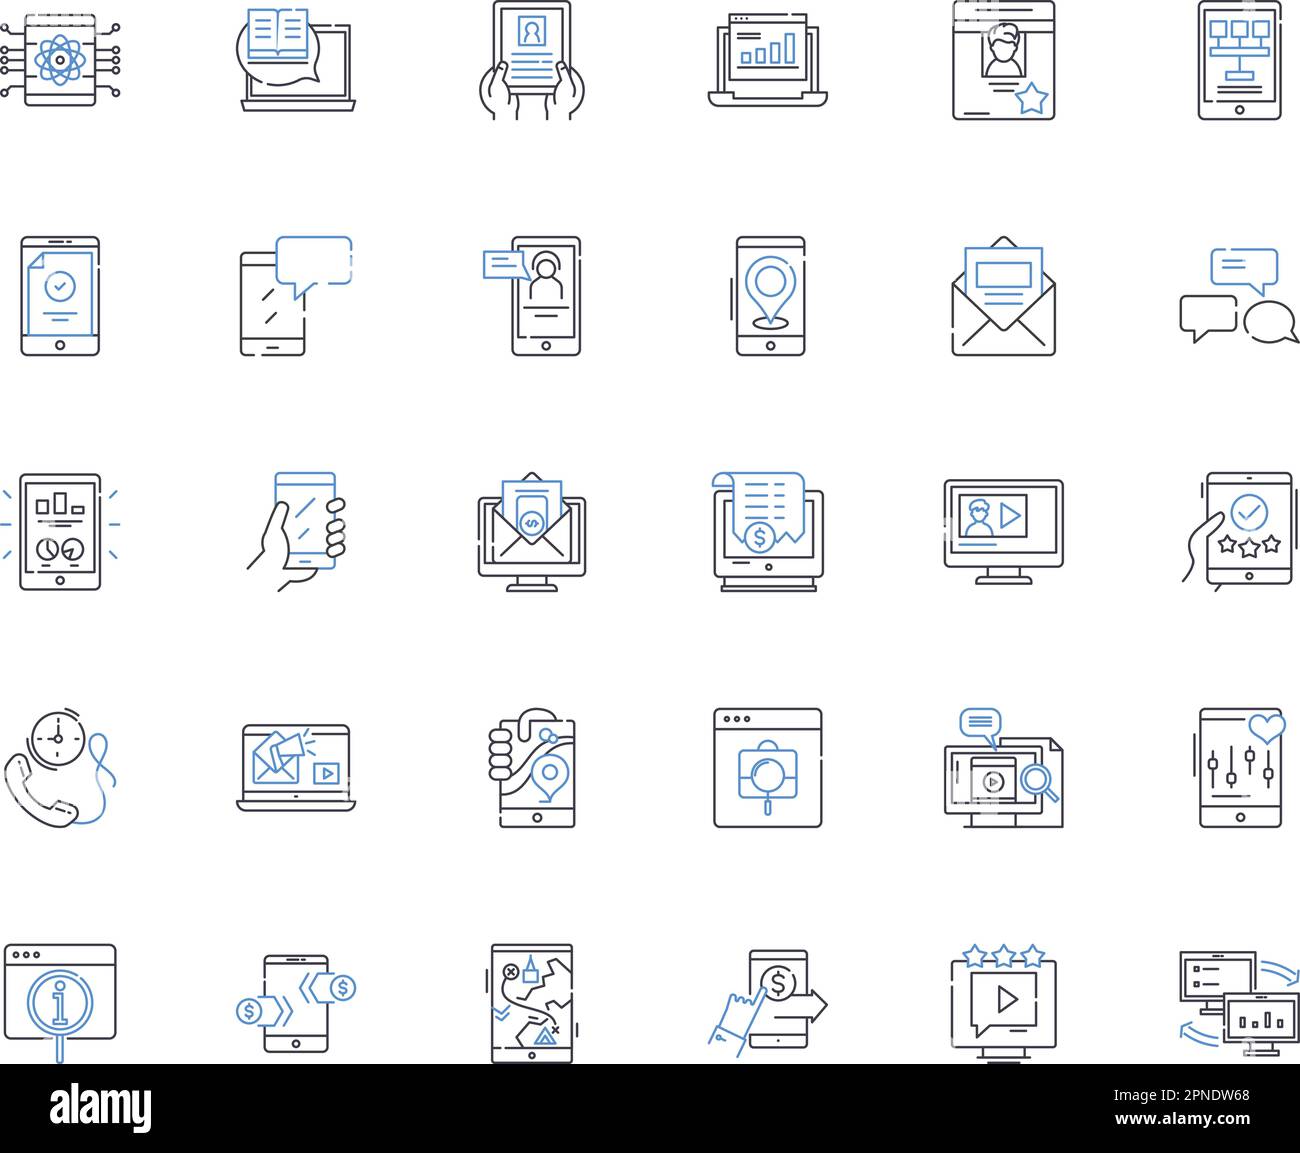 Wireless device line icons collection. Bluetooth, WiFi, LTE, G, Connection, Signal, Nerk vector and linear illustration. Transmission,Antenna,Radio Stock Vector